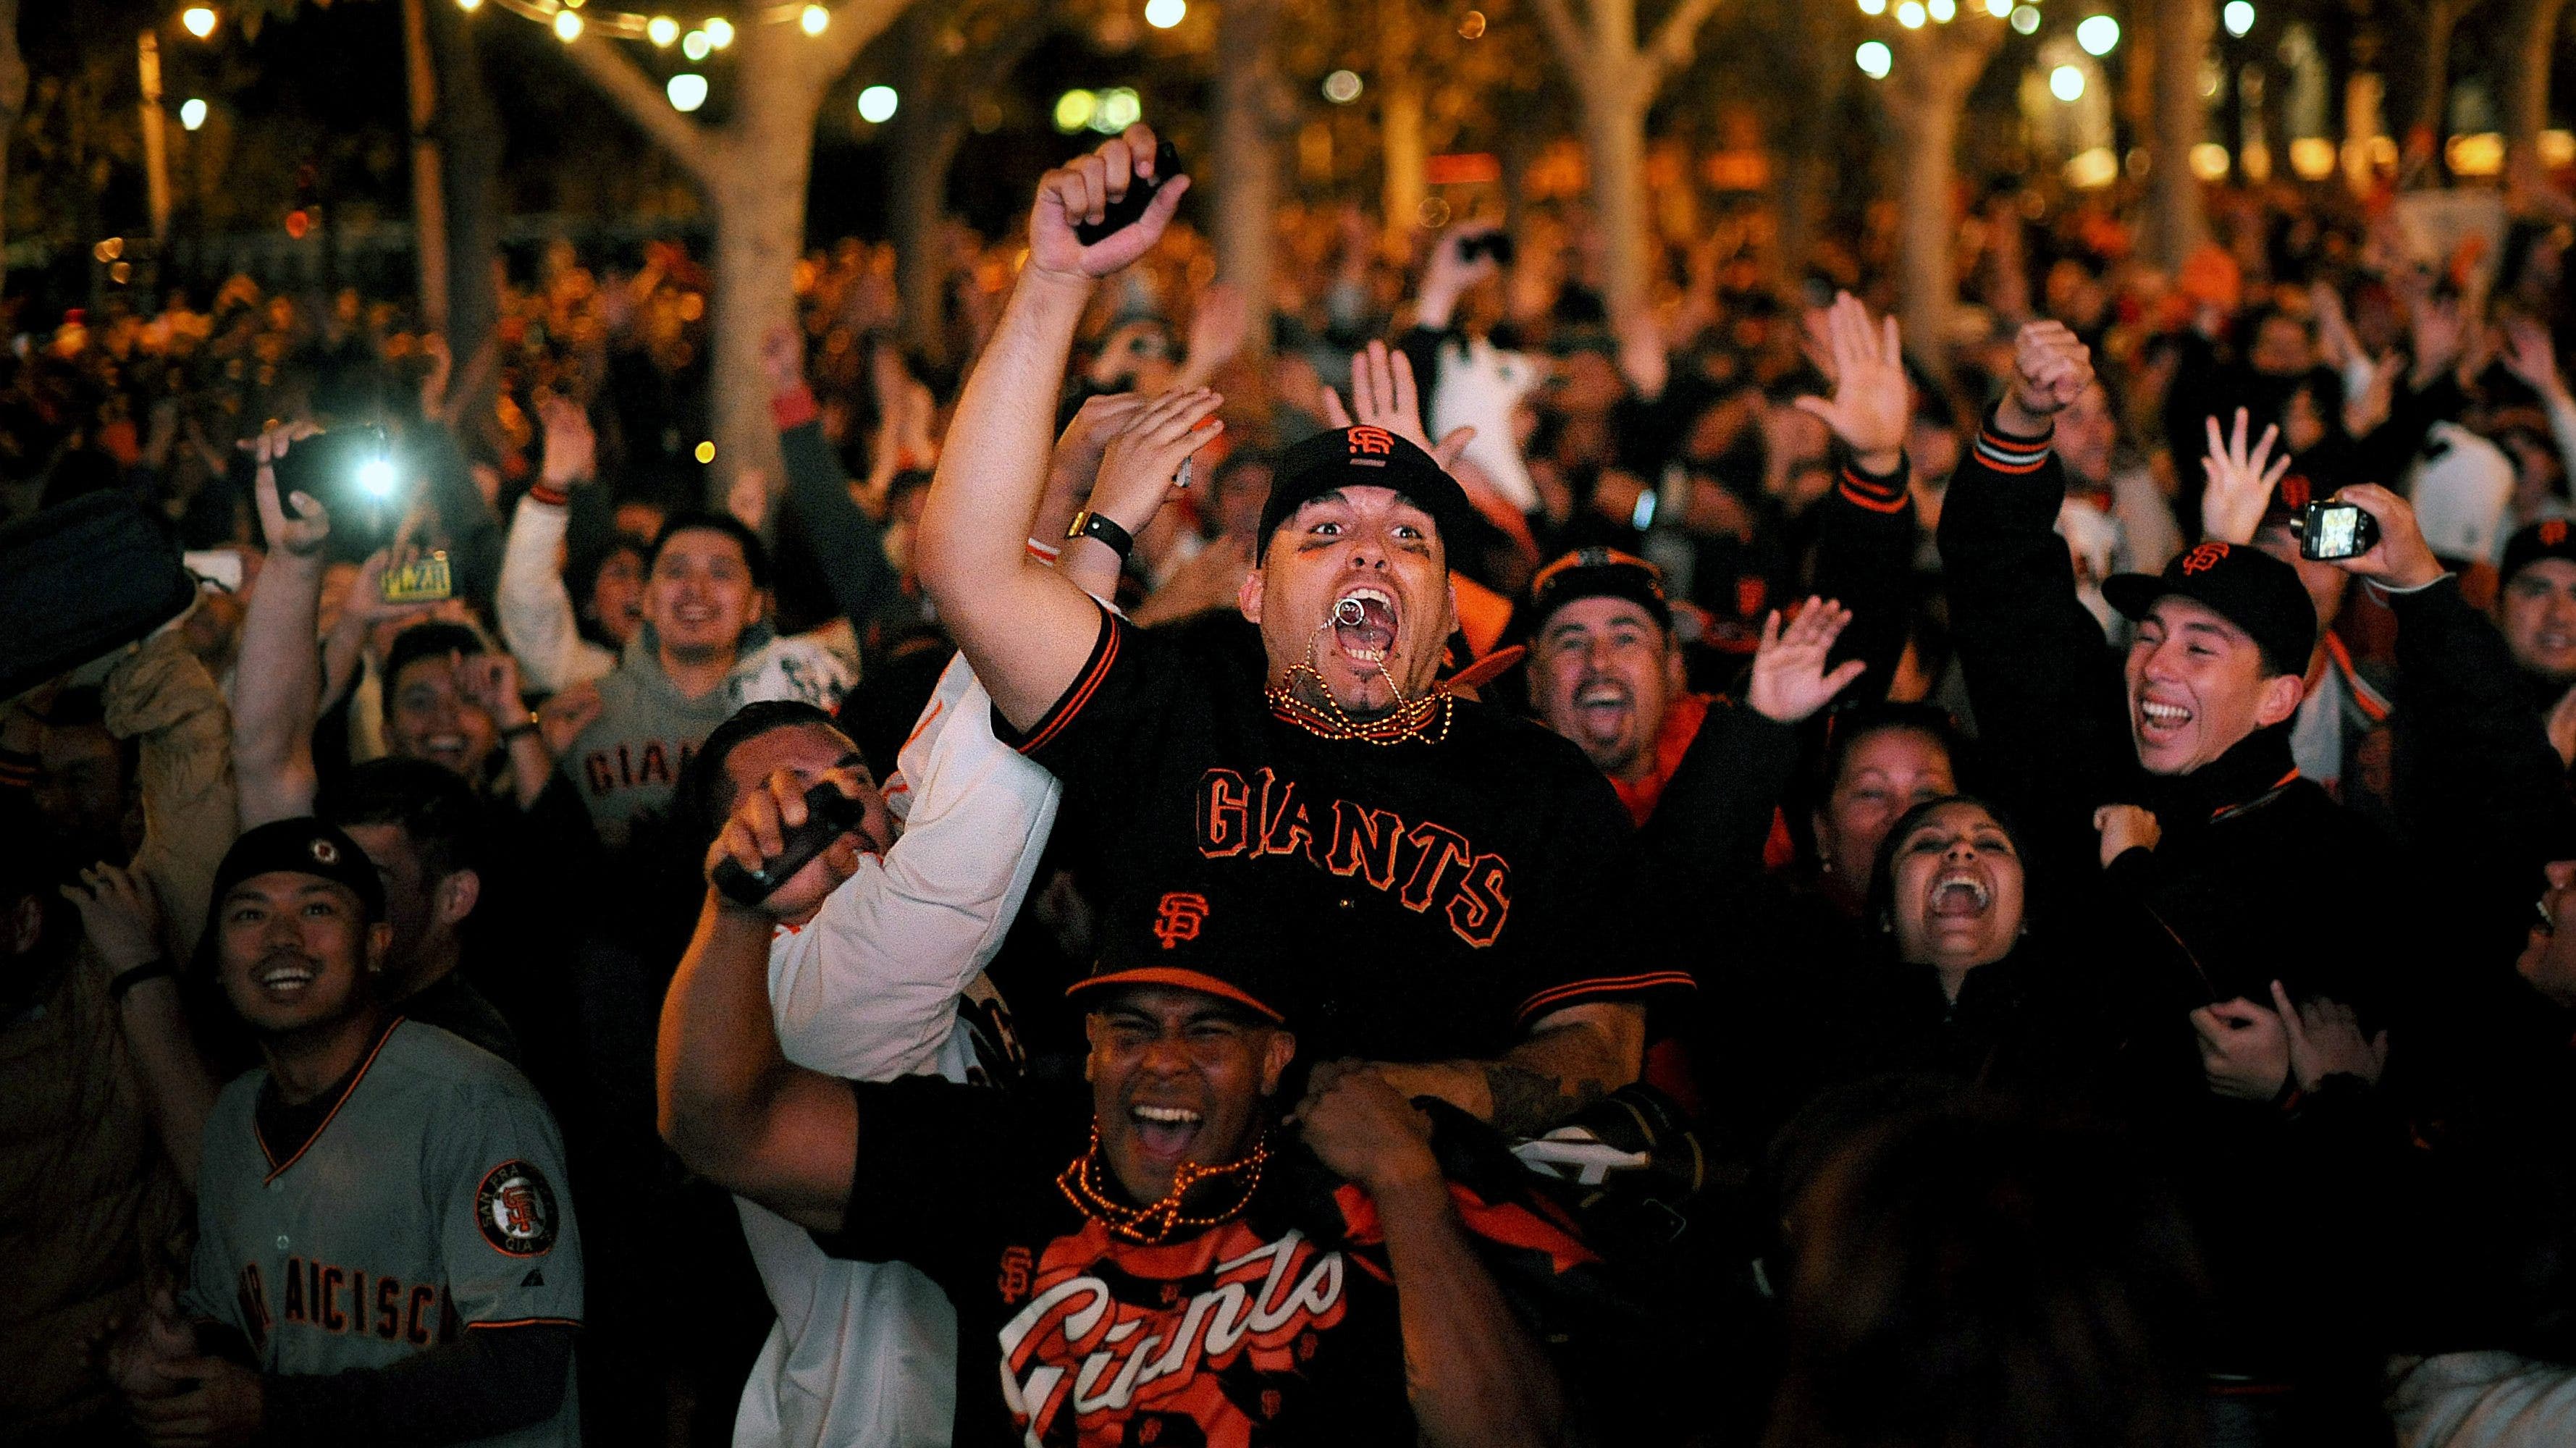 San Francisco Giants Fire Up Fans with World Series Victory